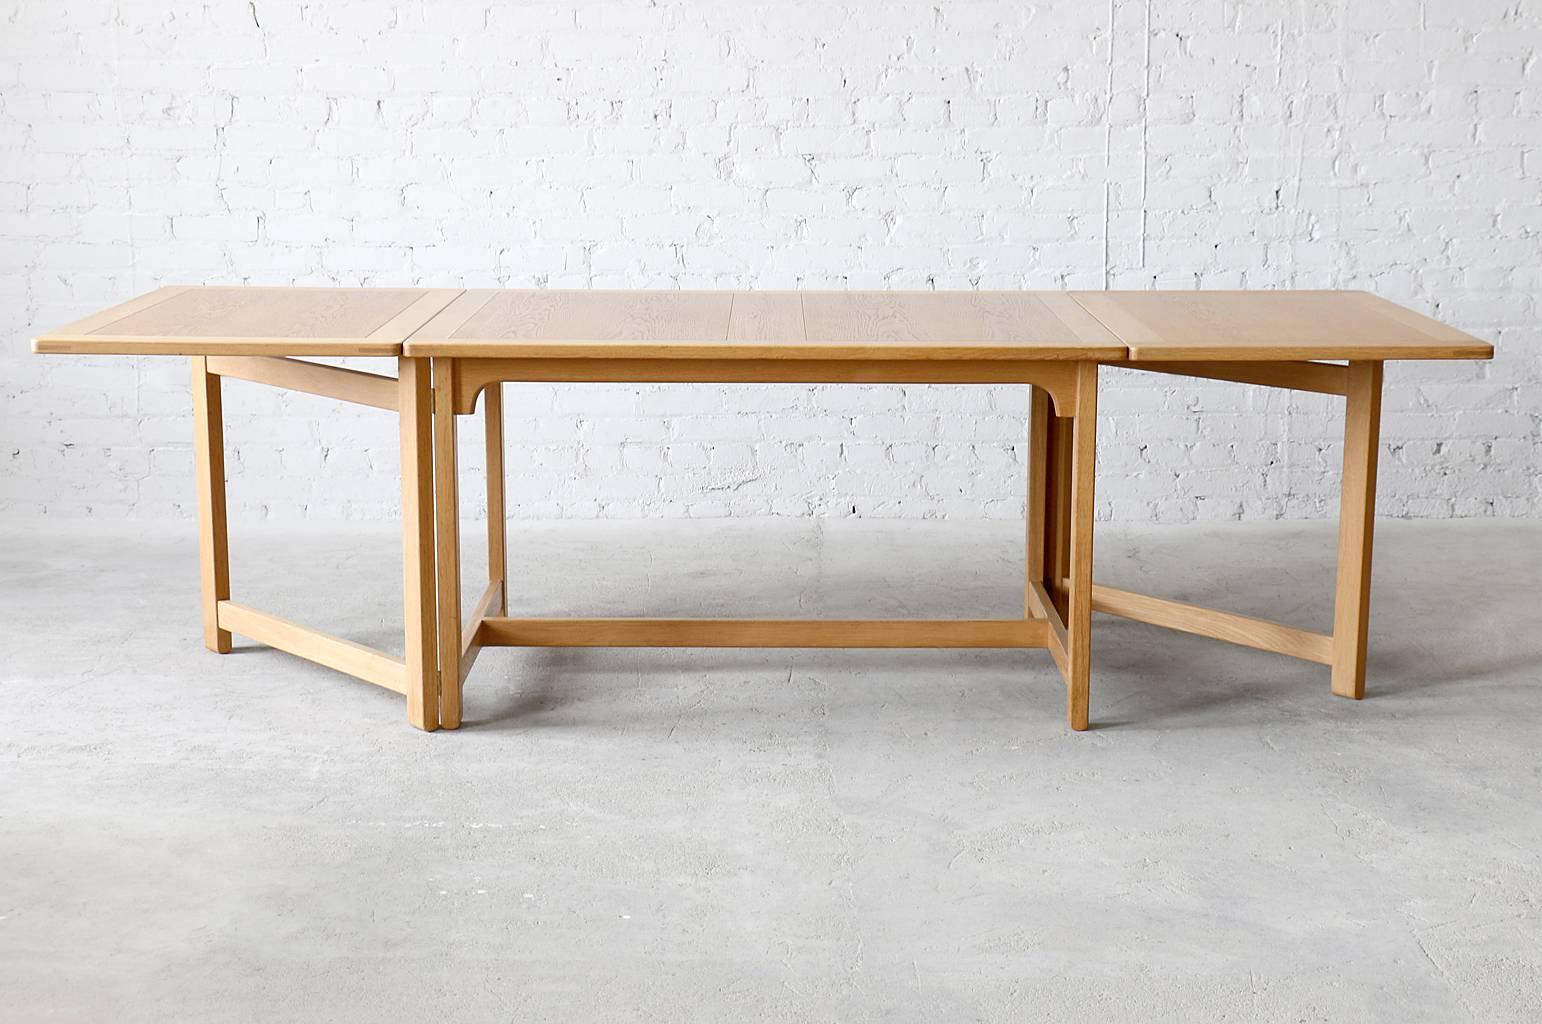 A Classic gateleg/dropleaf table designed by Børge Mogensen for Fredericia. Impressive solid oak frame and tabletop perimeter. Could be used as a dining table or work table. 

- Model #BM71 